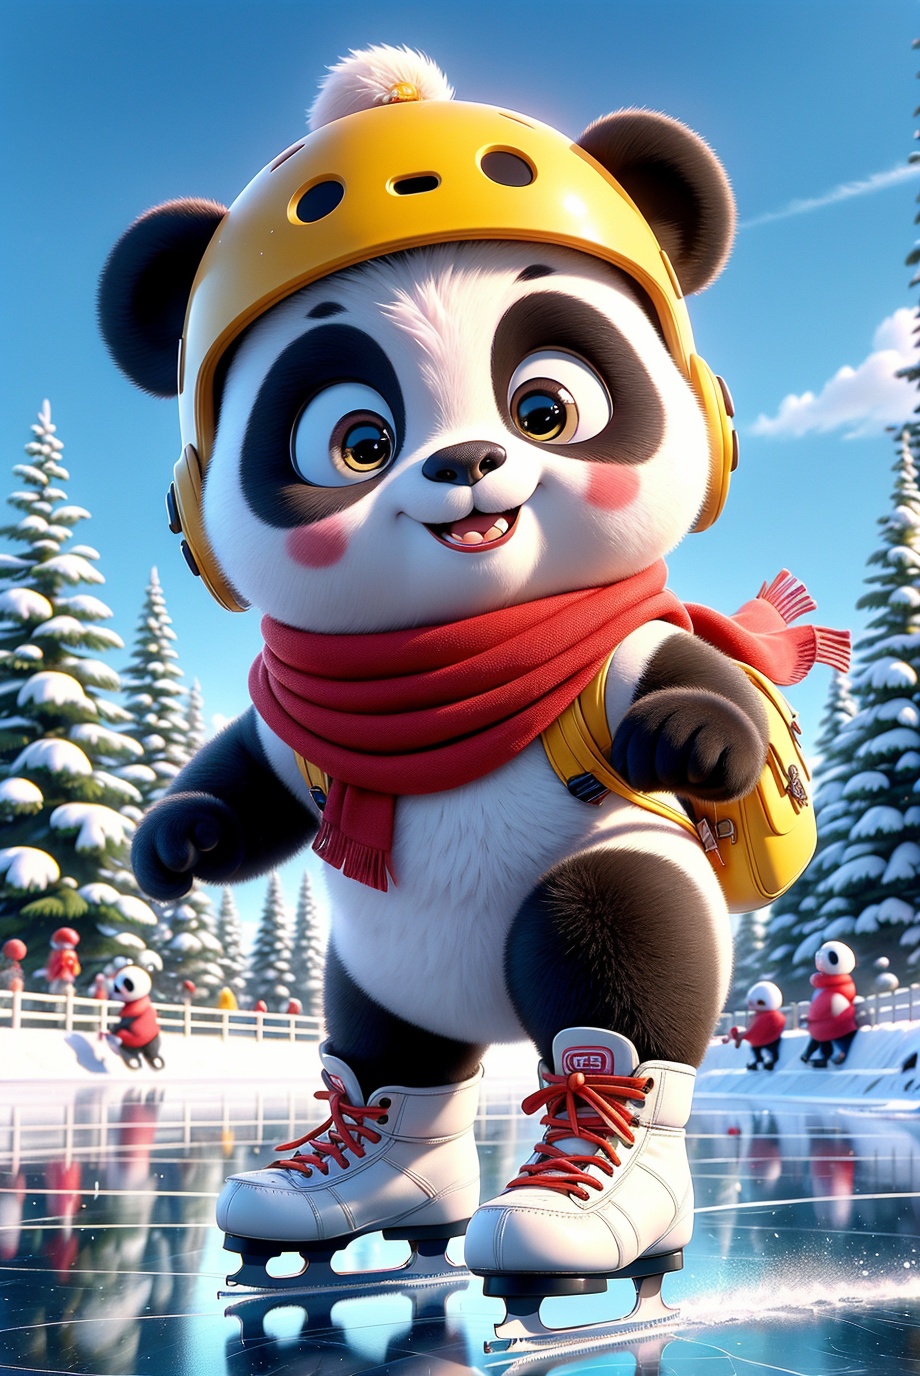 C4D,3d style,UIAIP, panda, a panda bear skating on a rink in a cartoon style with a helmet and scarf on, with trees in the background,<lora:UIApandaip:0.7>,